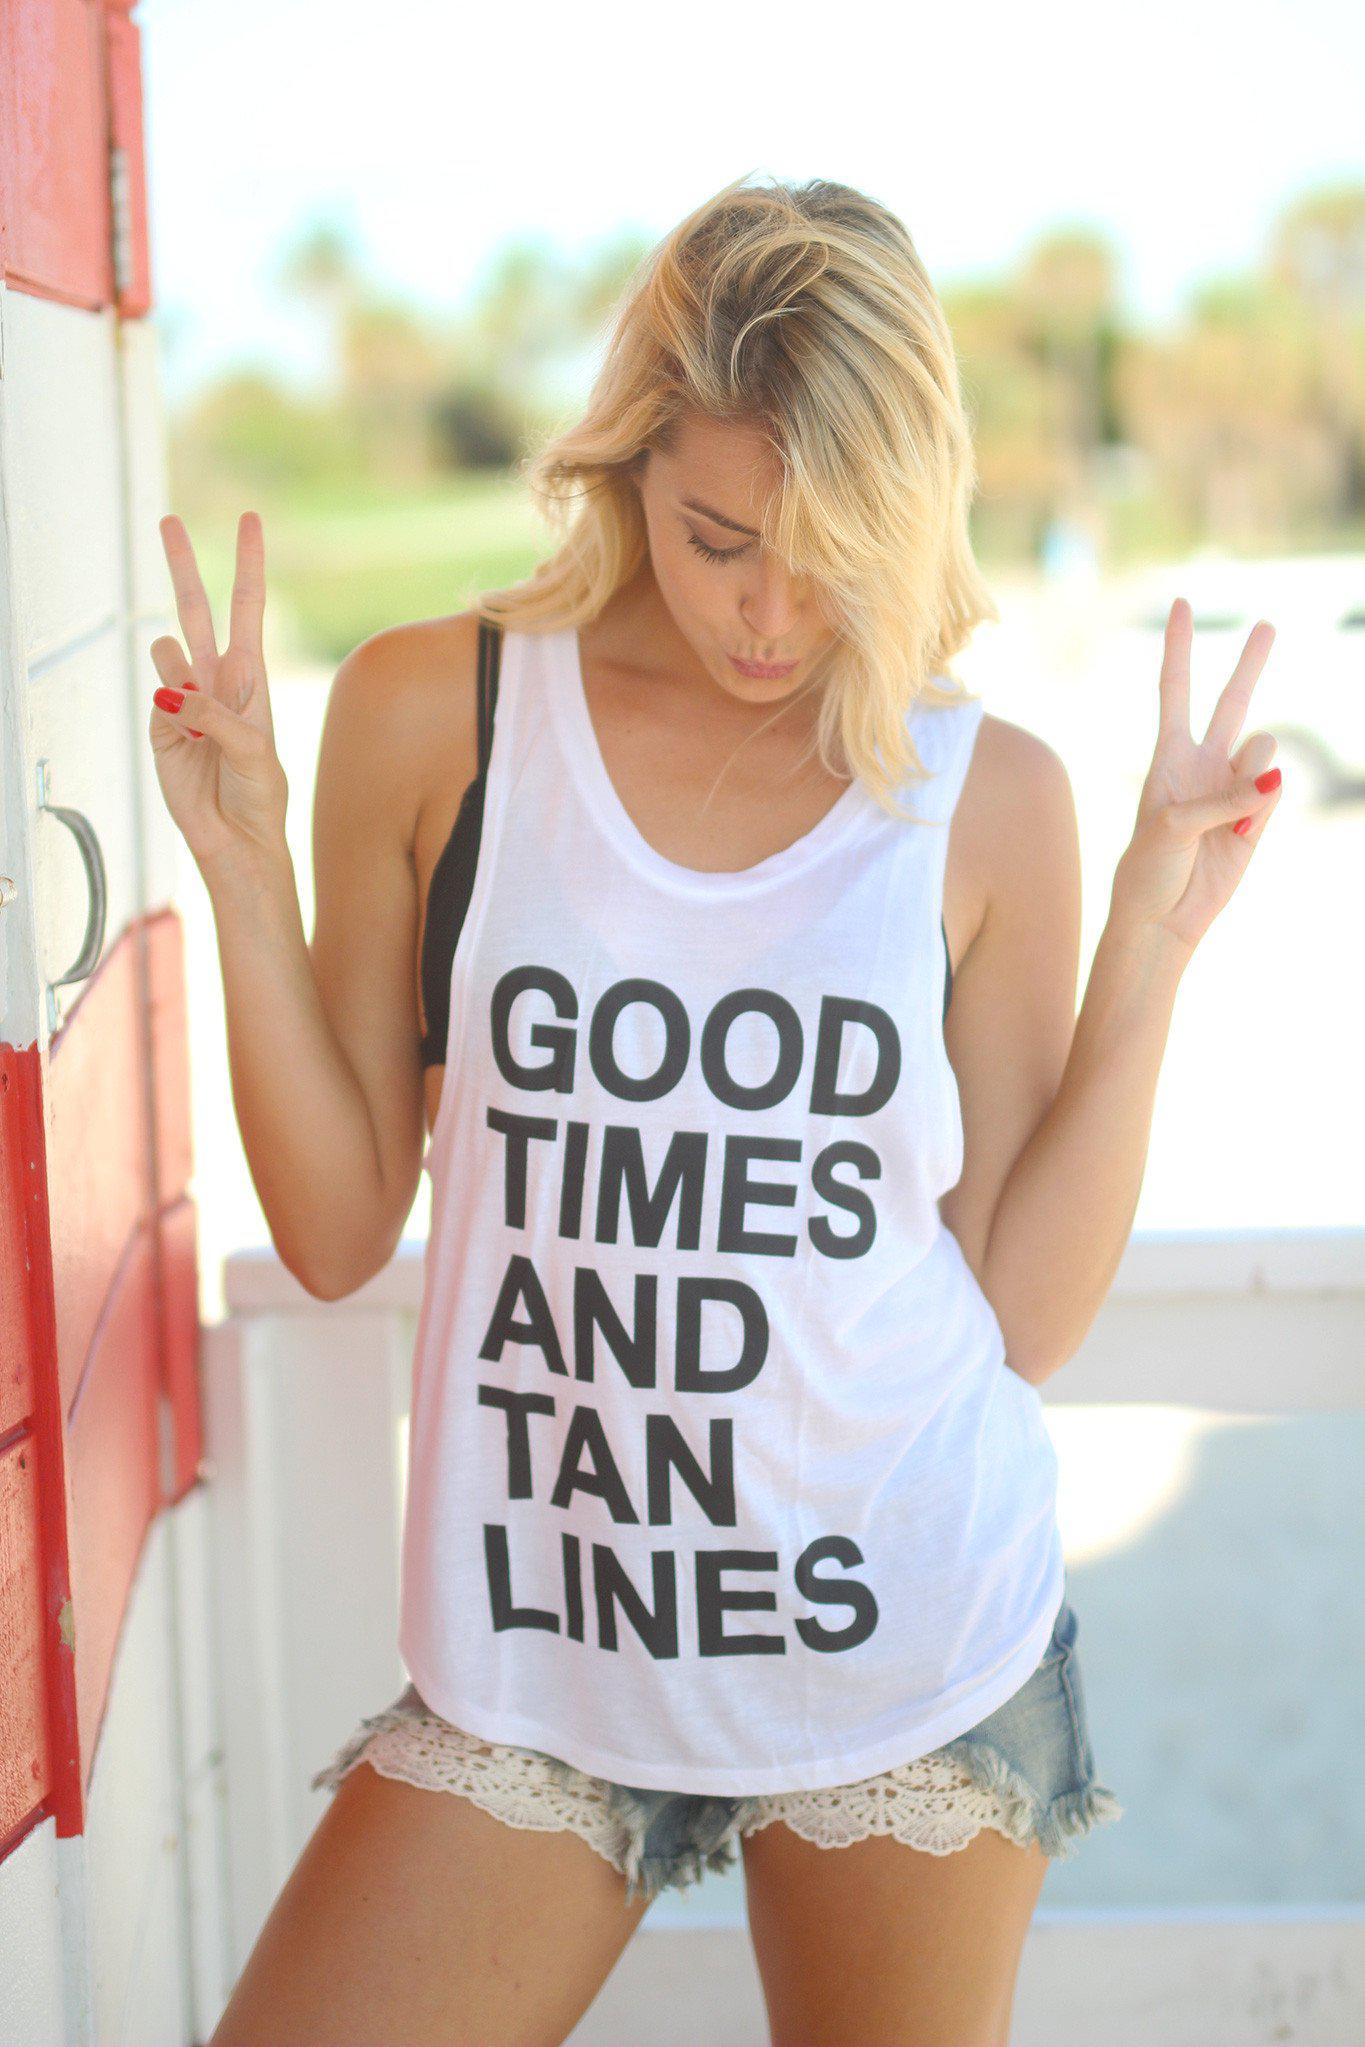 Good Times And Tan Lines White Tank Top Cute Top Saved By The Dress